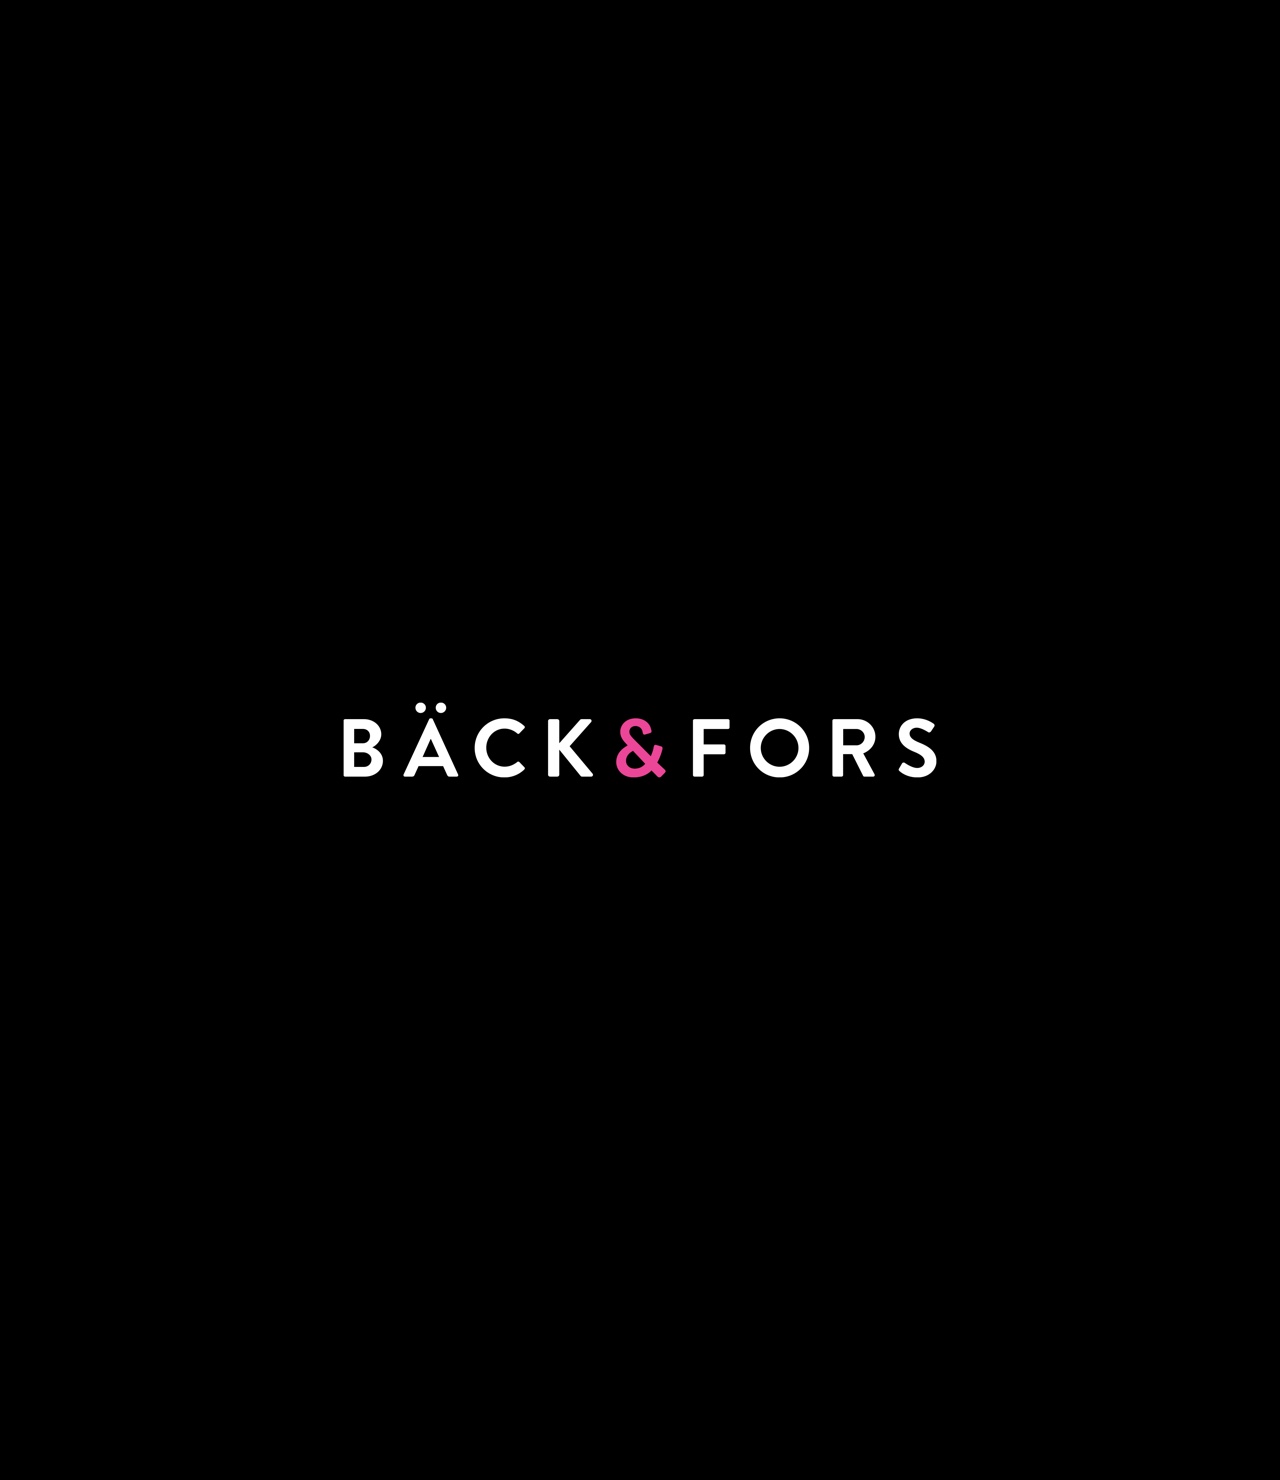 Logotype re-design suggestion for Bäck & Fors